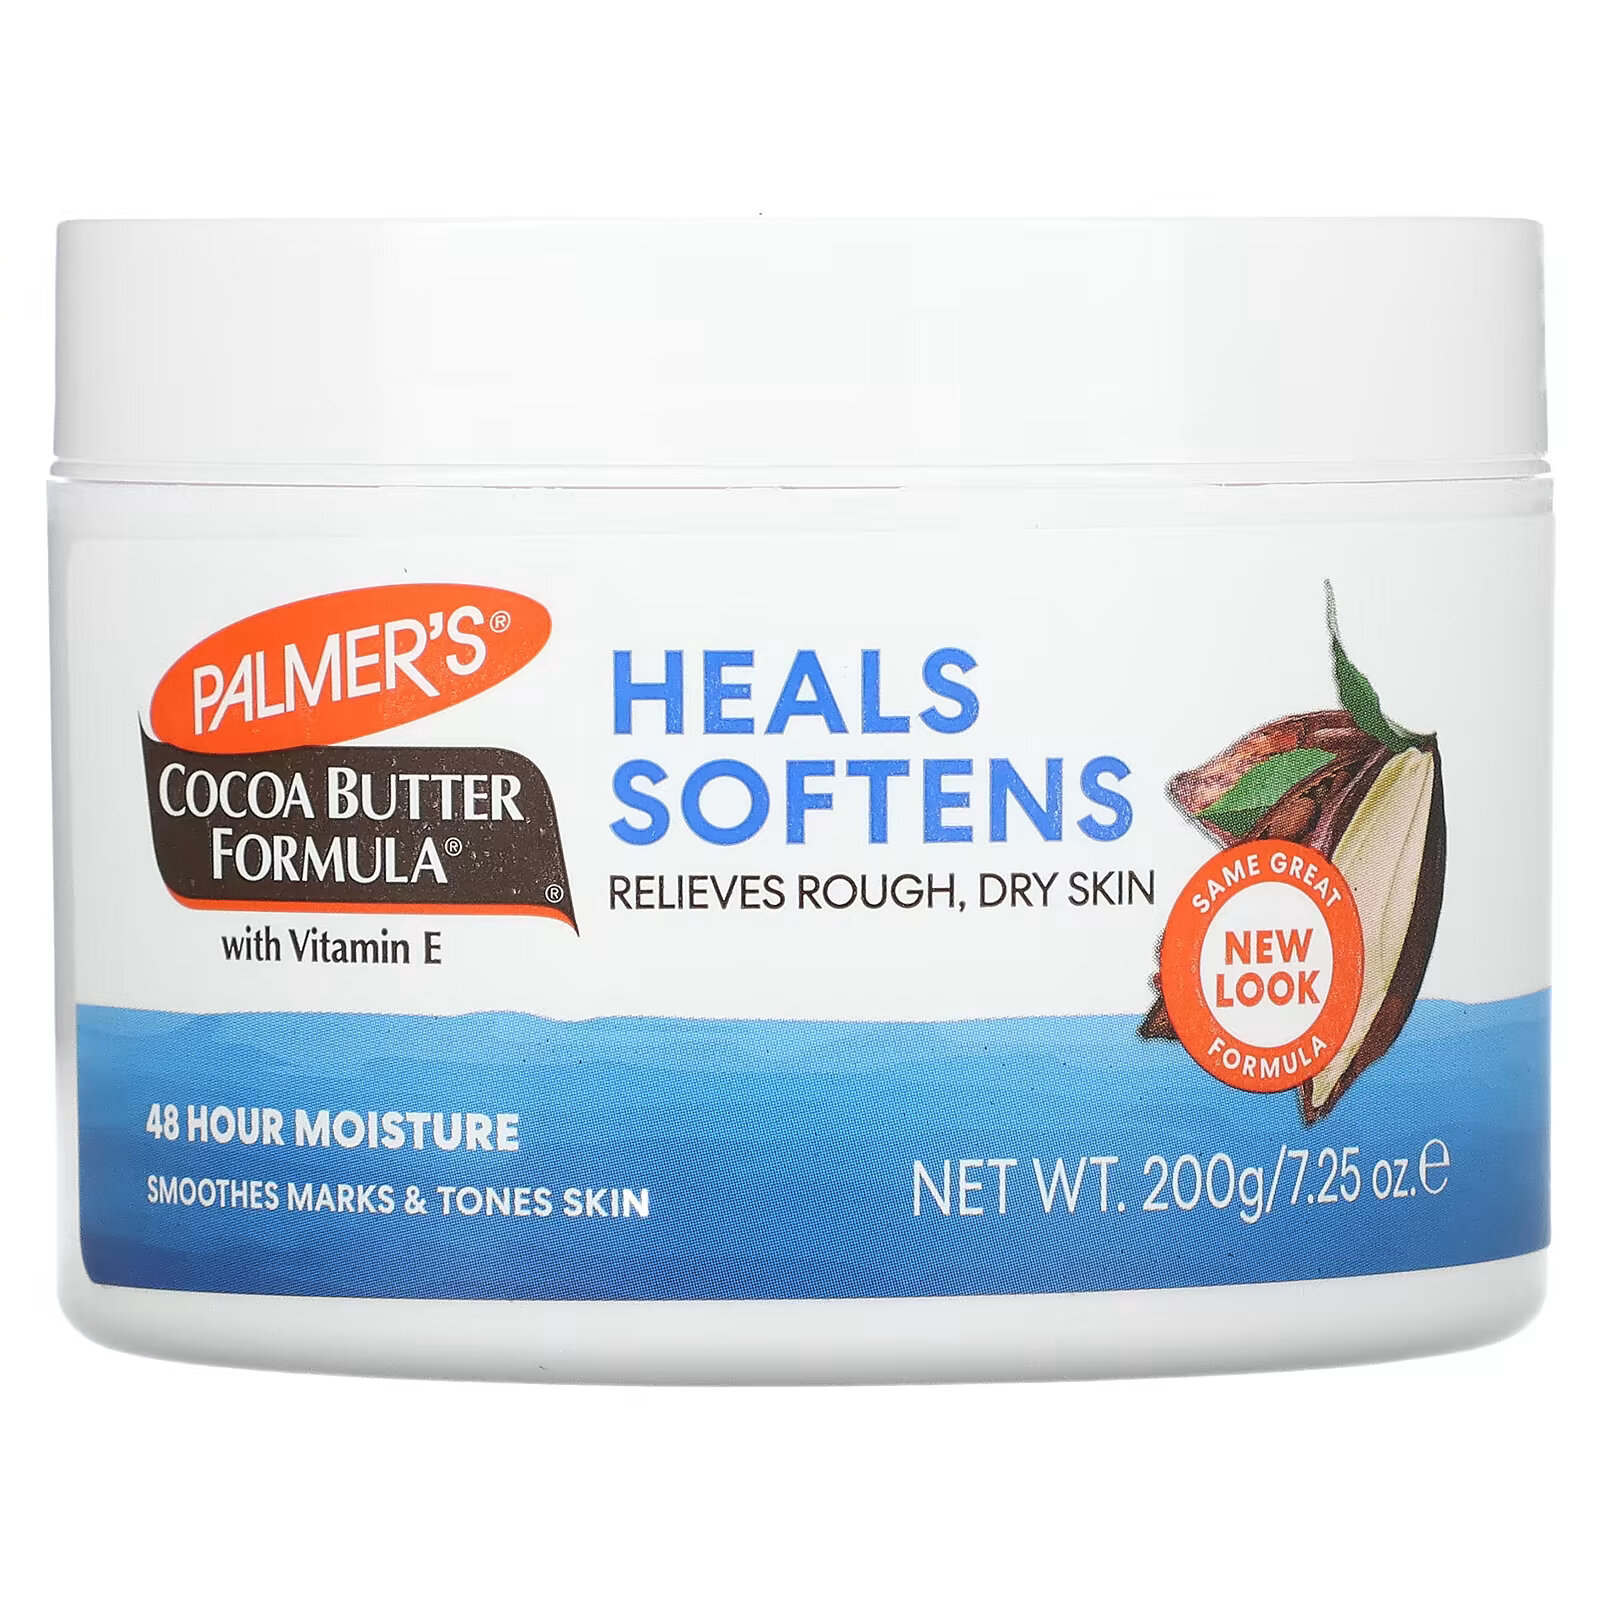 Palmer's, Cocoa Butter Formula, масло для тела, 200 г (7,25 унций) palmer s cocoa butter formula масло для тела 200 г 7 25 унций